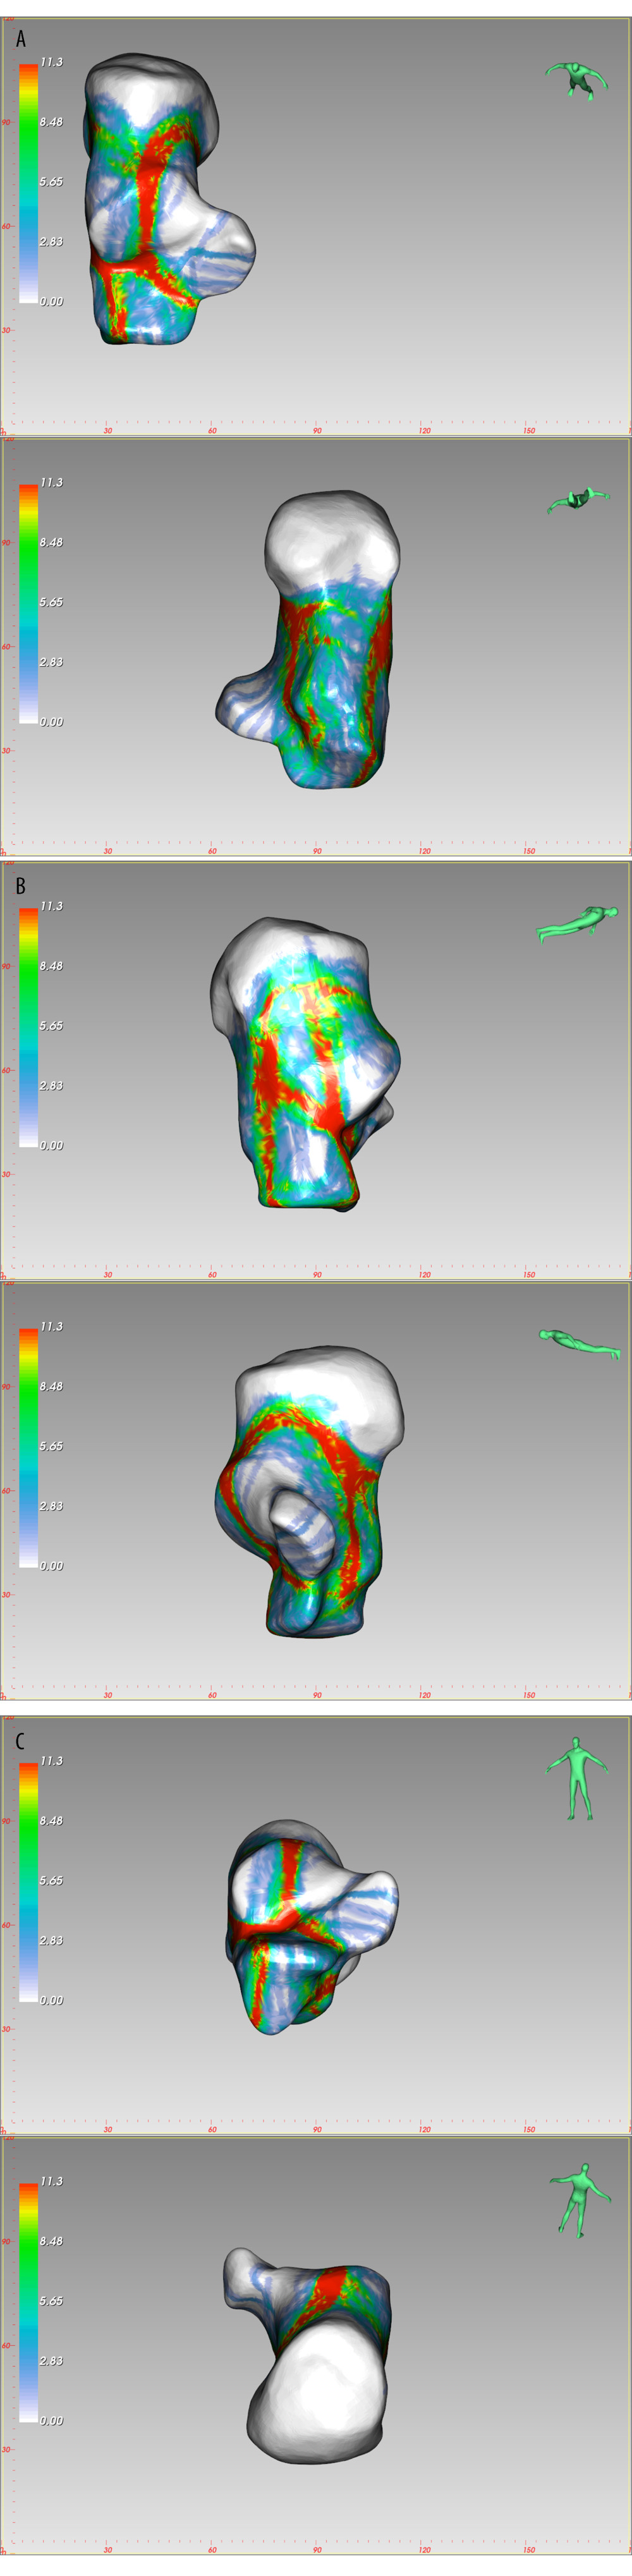 The fracture heatmap distribution of Sanders type 2B joint depression fracture, created by E-3D Medical 18.01 software (Central South University, Changsha, China). (A) Top view, Bottom view, (B) Lateral view, Medial view, (C) Front view, Rear view.